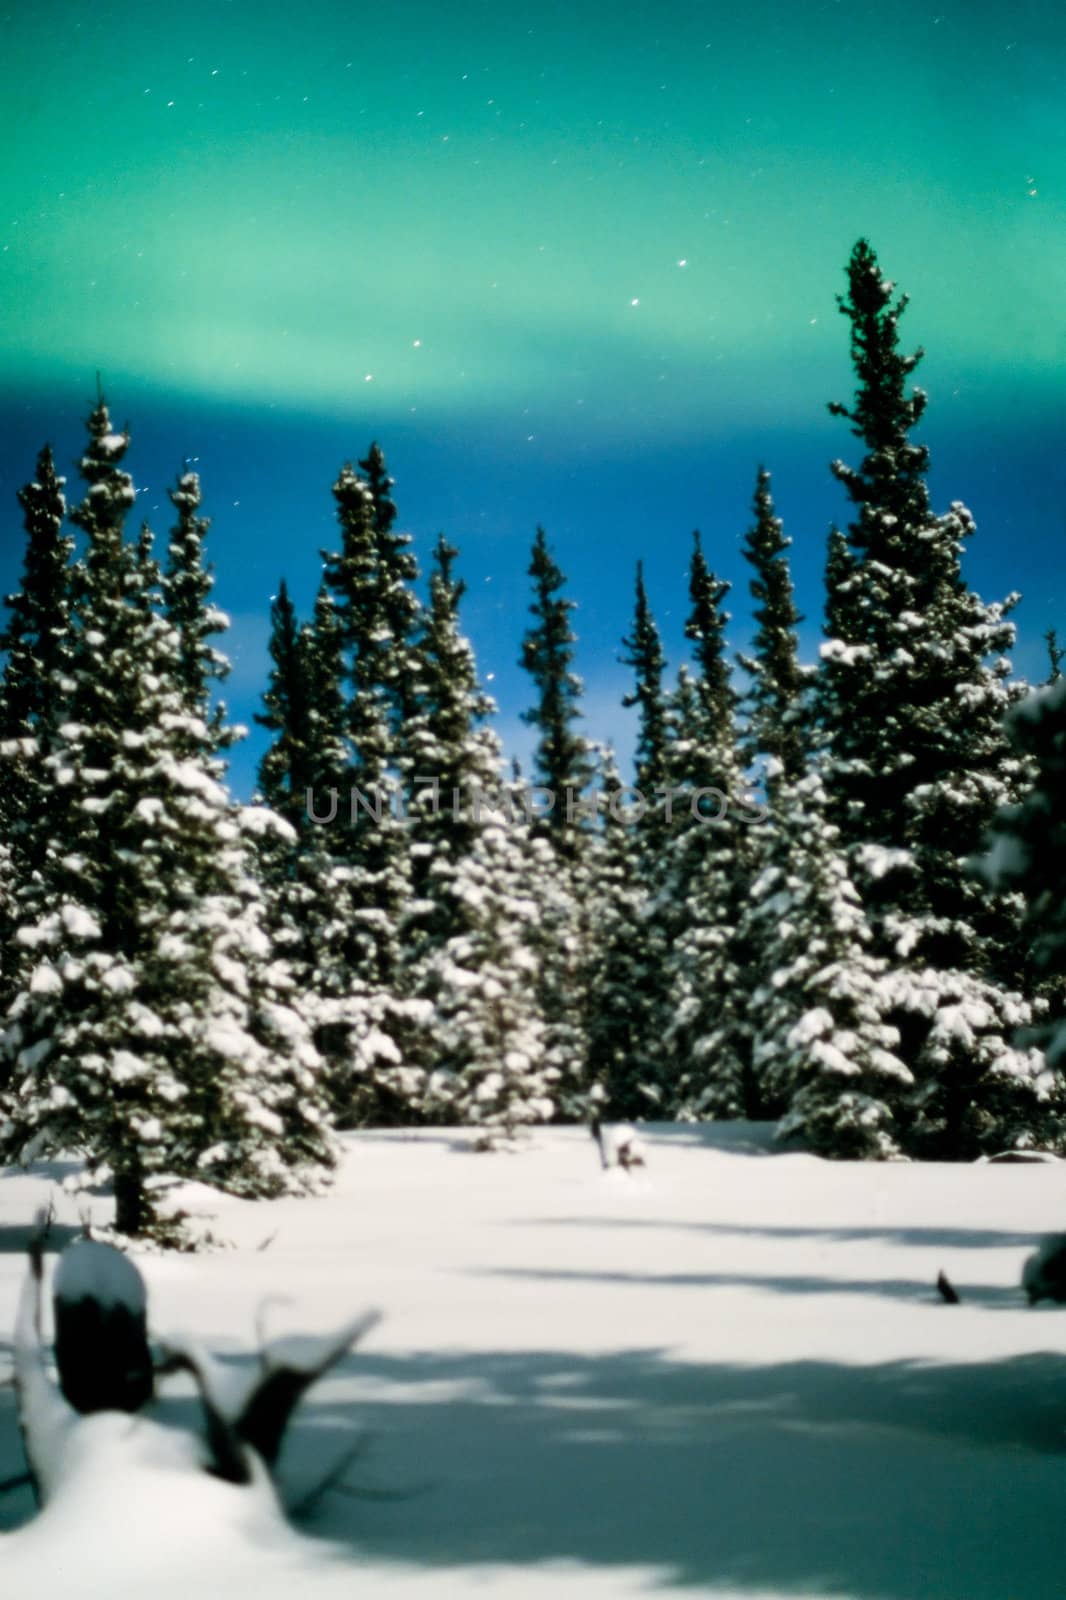 Northern Lights (Aurora borealis) over moon lit snow-covered spruce trees of boreal forest.